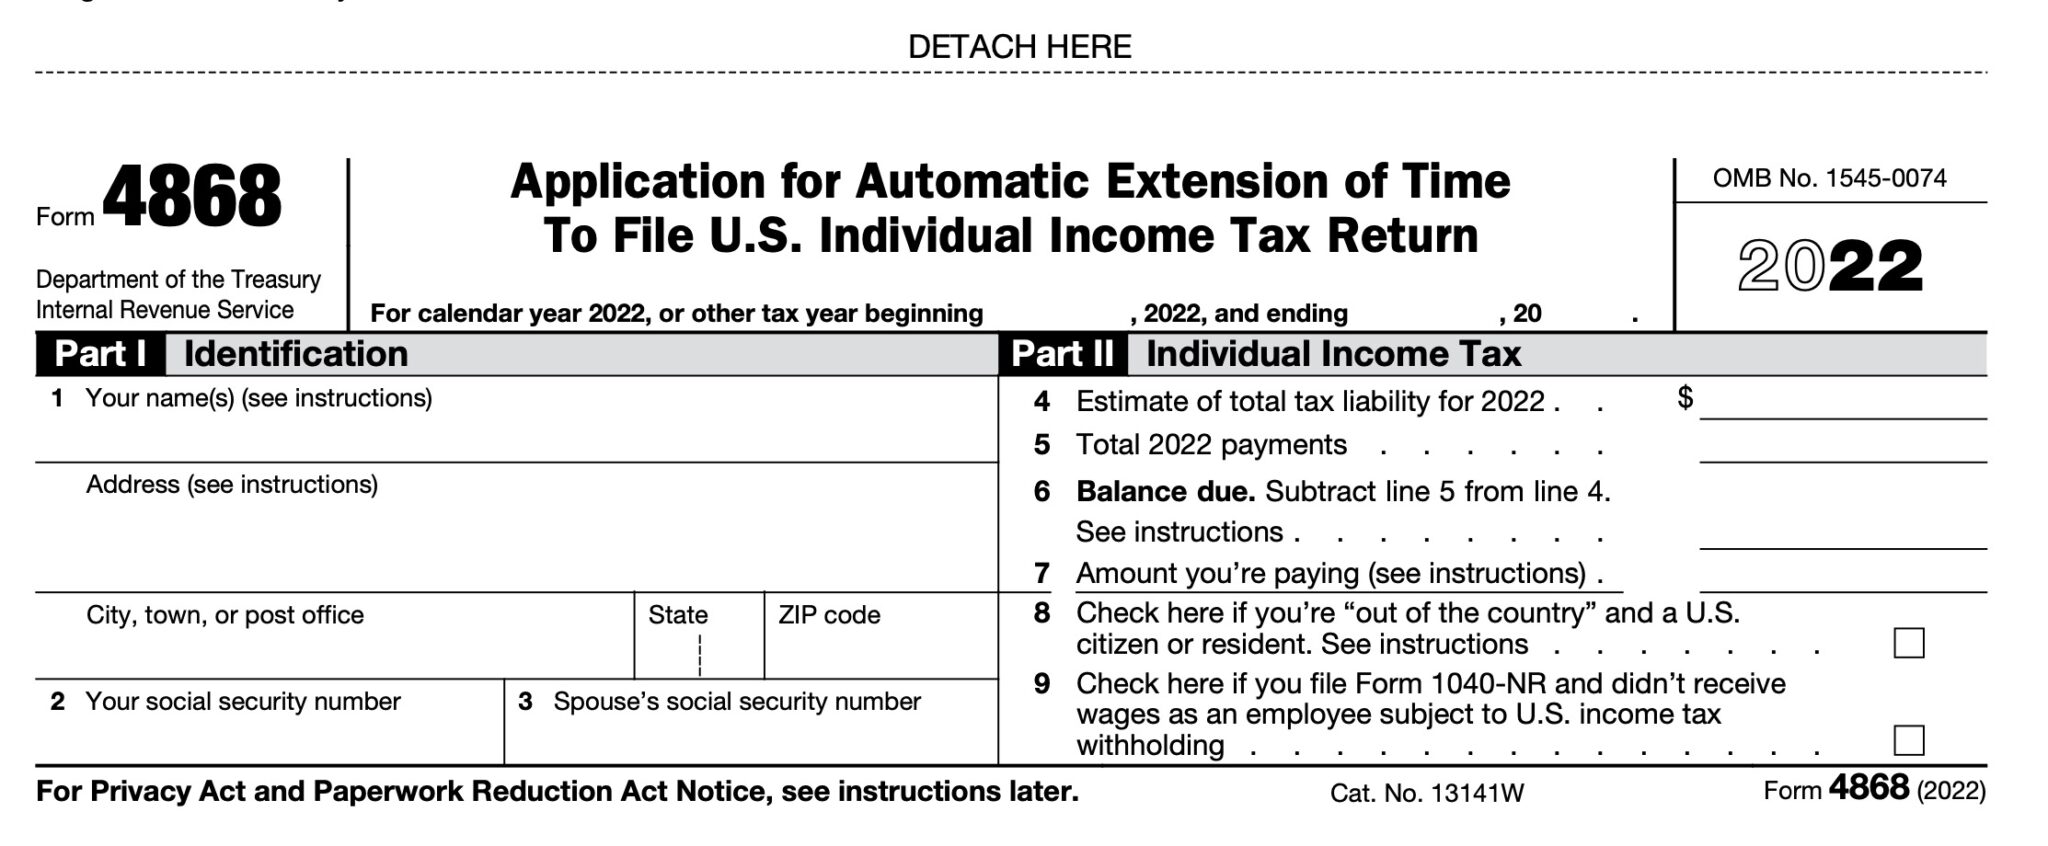 how-to-get-a-tax-extension-online-and-avoid-late-filing-penalties